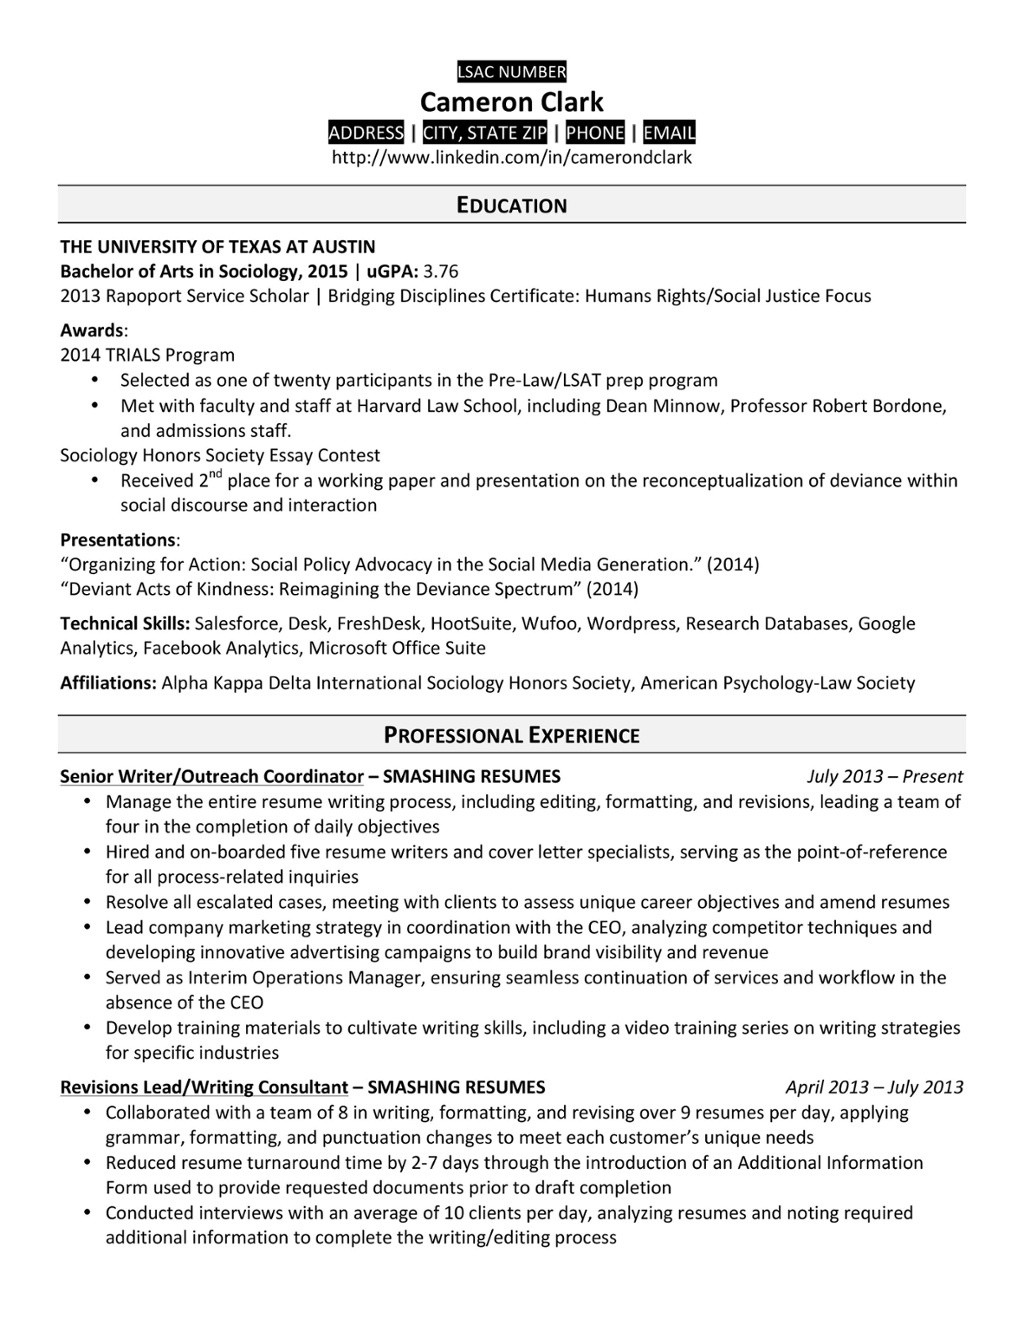 Vp Of Demand Geneneration Sample Resume Intros 5 Law School Resume Templates: Prepping Your Resume for Law School …